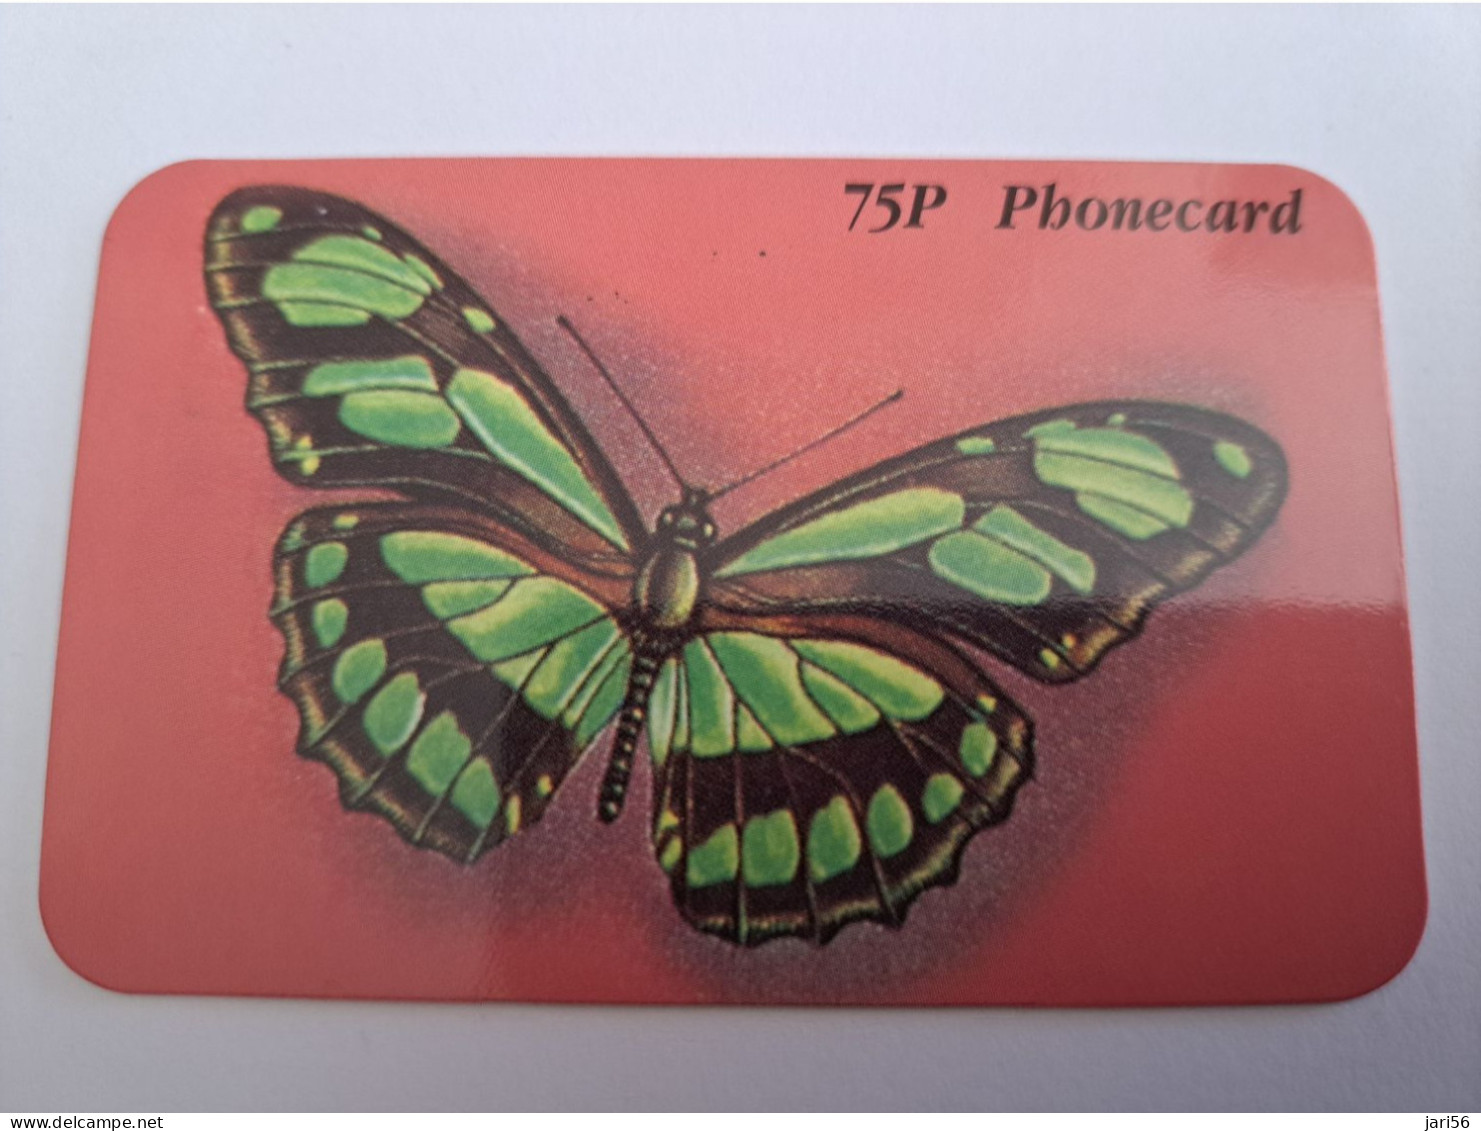 GREAT BRITAIN  / DISCOUNT PHONECARD/BUTTERFLY / 75 PENCE    PREPAID CARD / MINT      **13586** - Collections